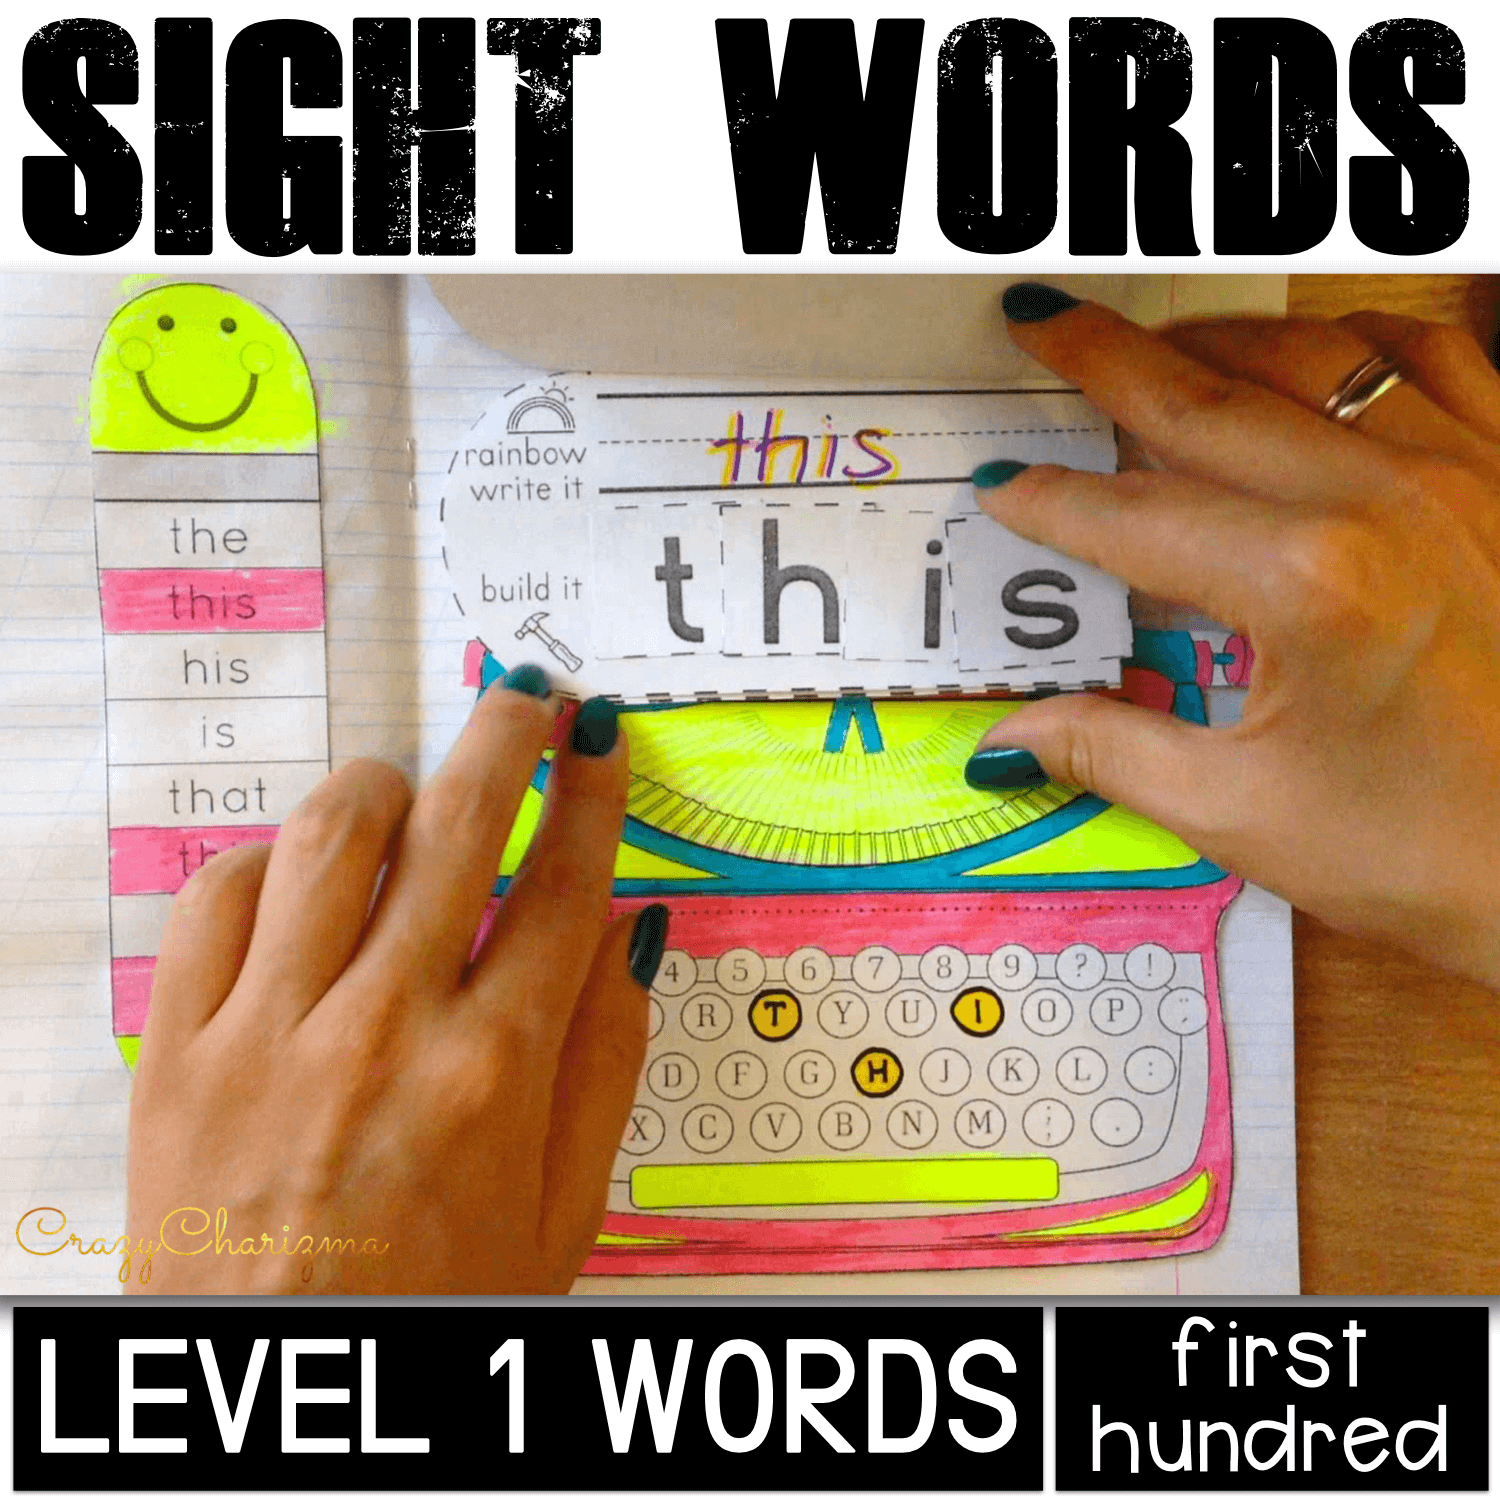 Sight Word Activities | Edmark Words Level 1 (first hundred)